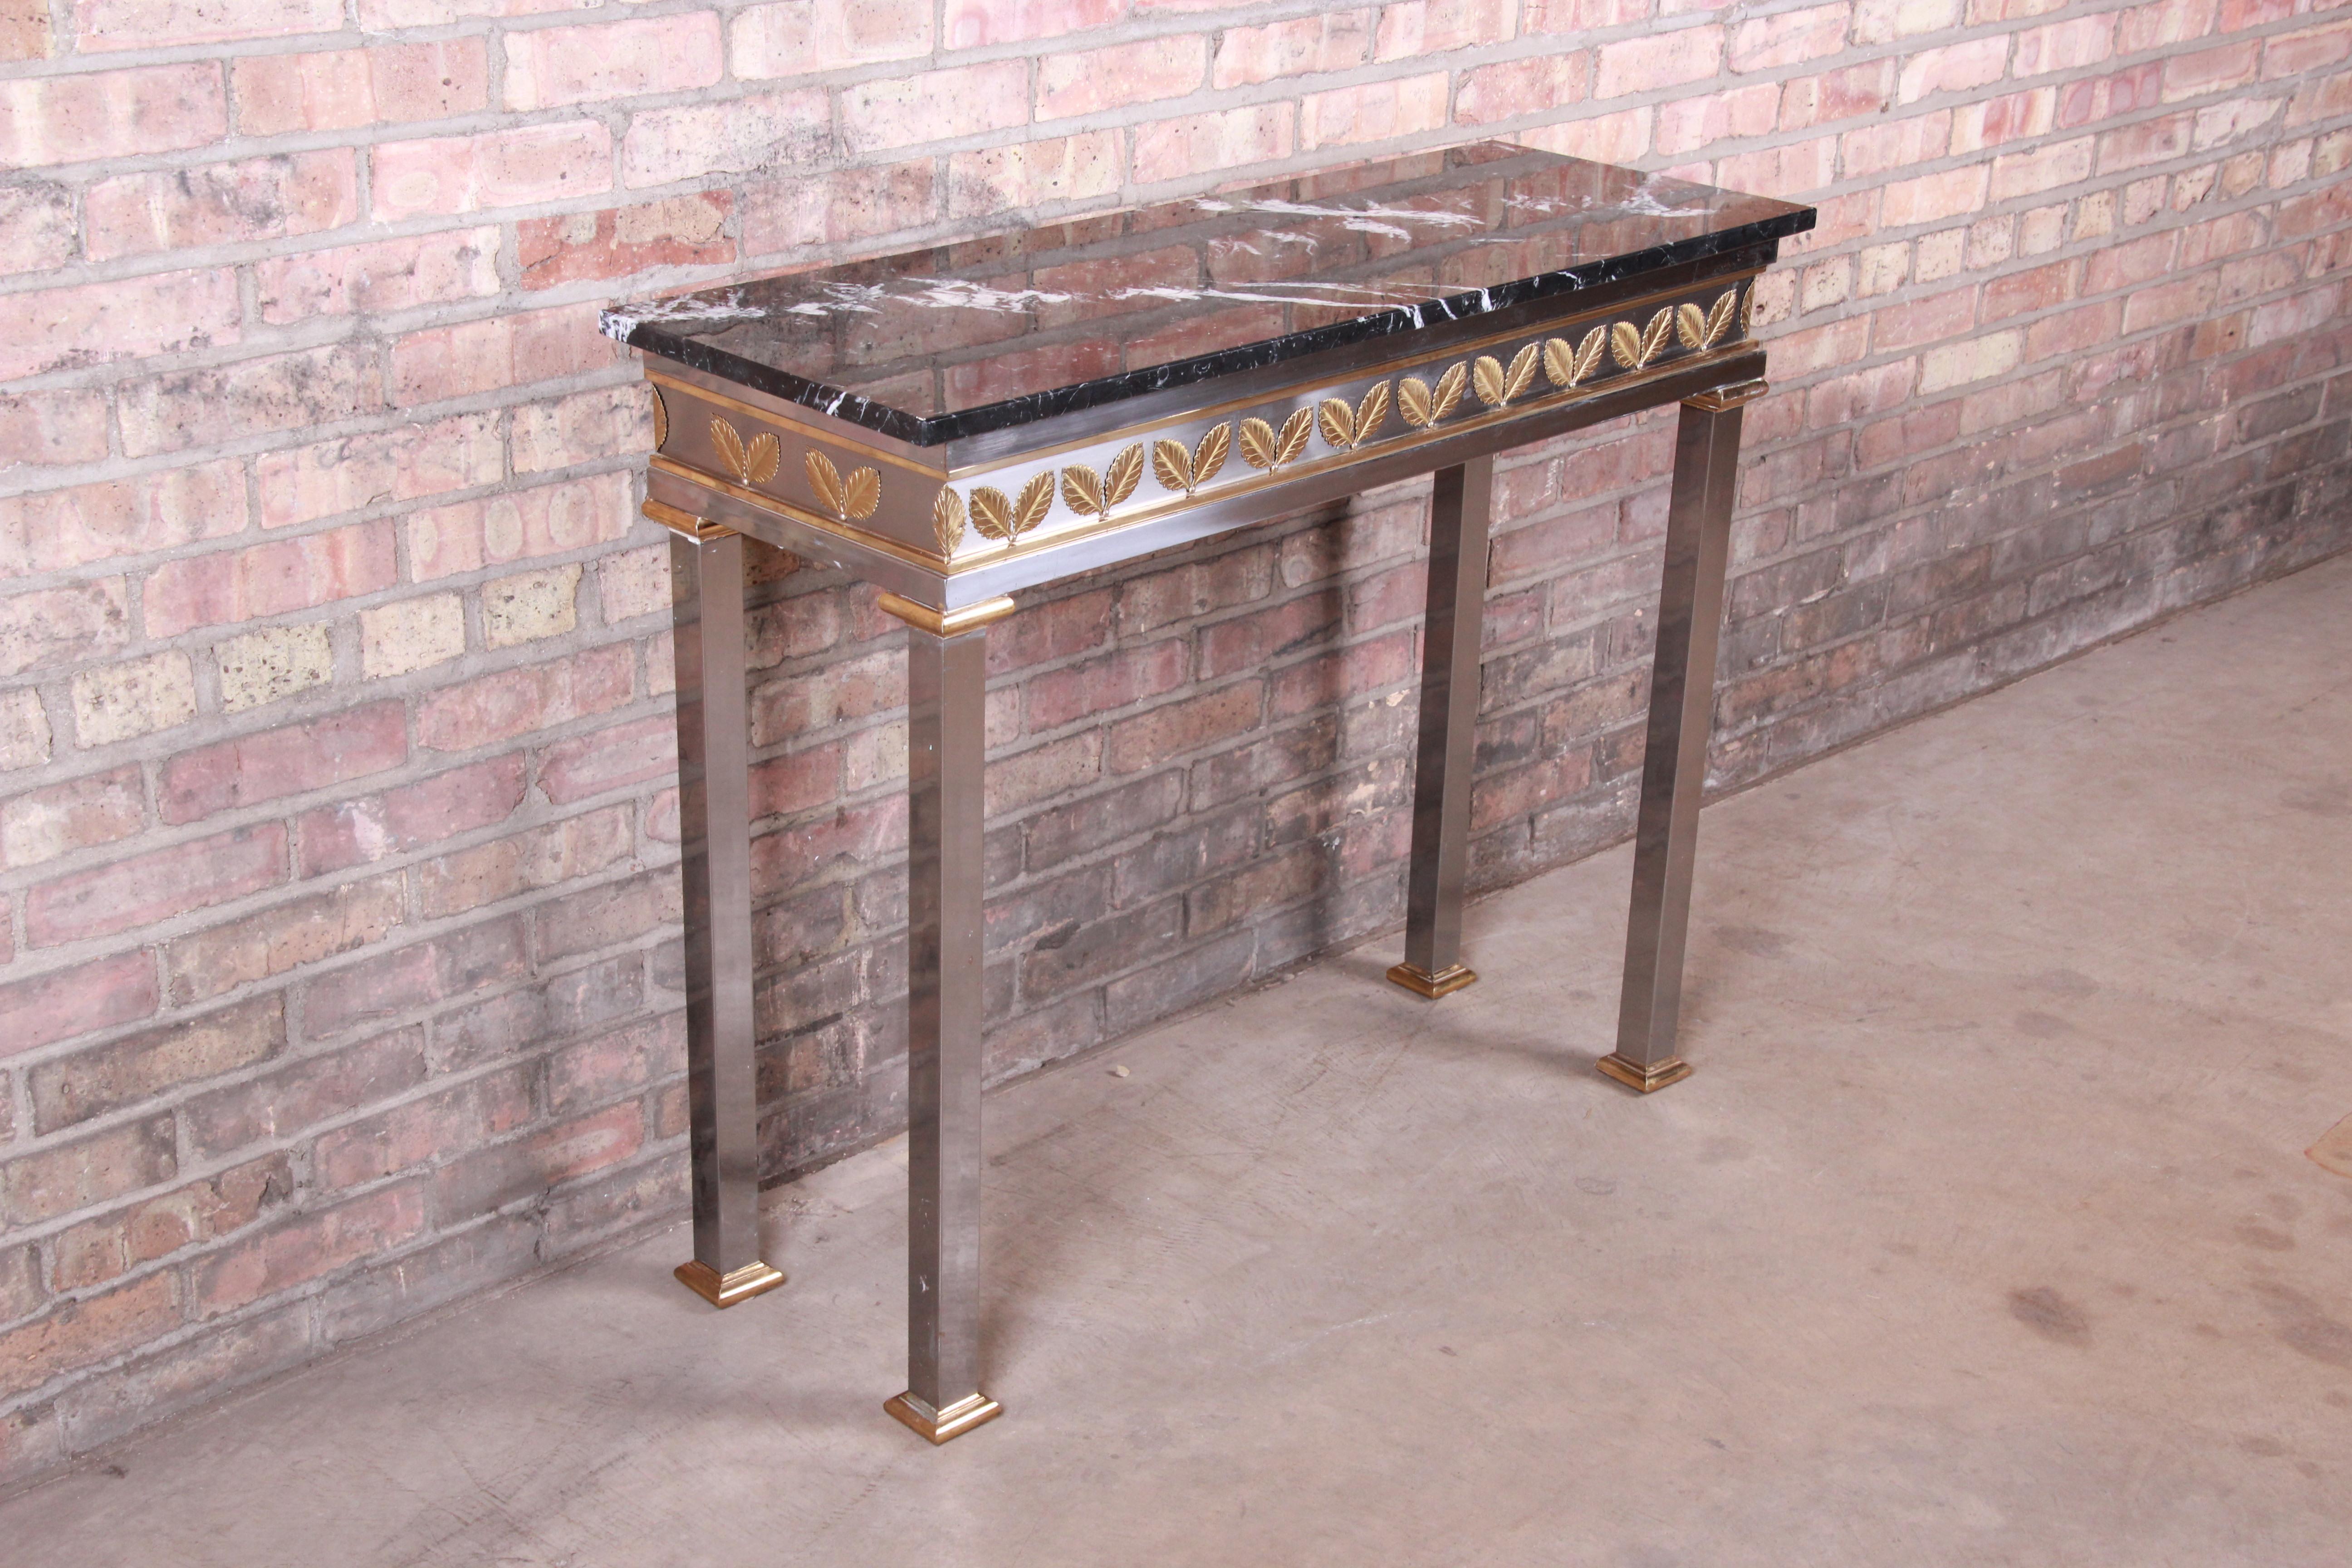 20th Century Italian Modern Console Table in Chrome, Brass, and Marble